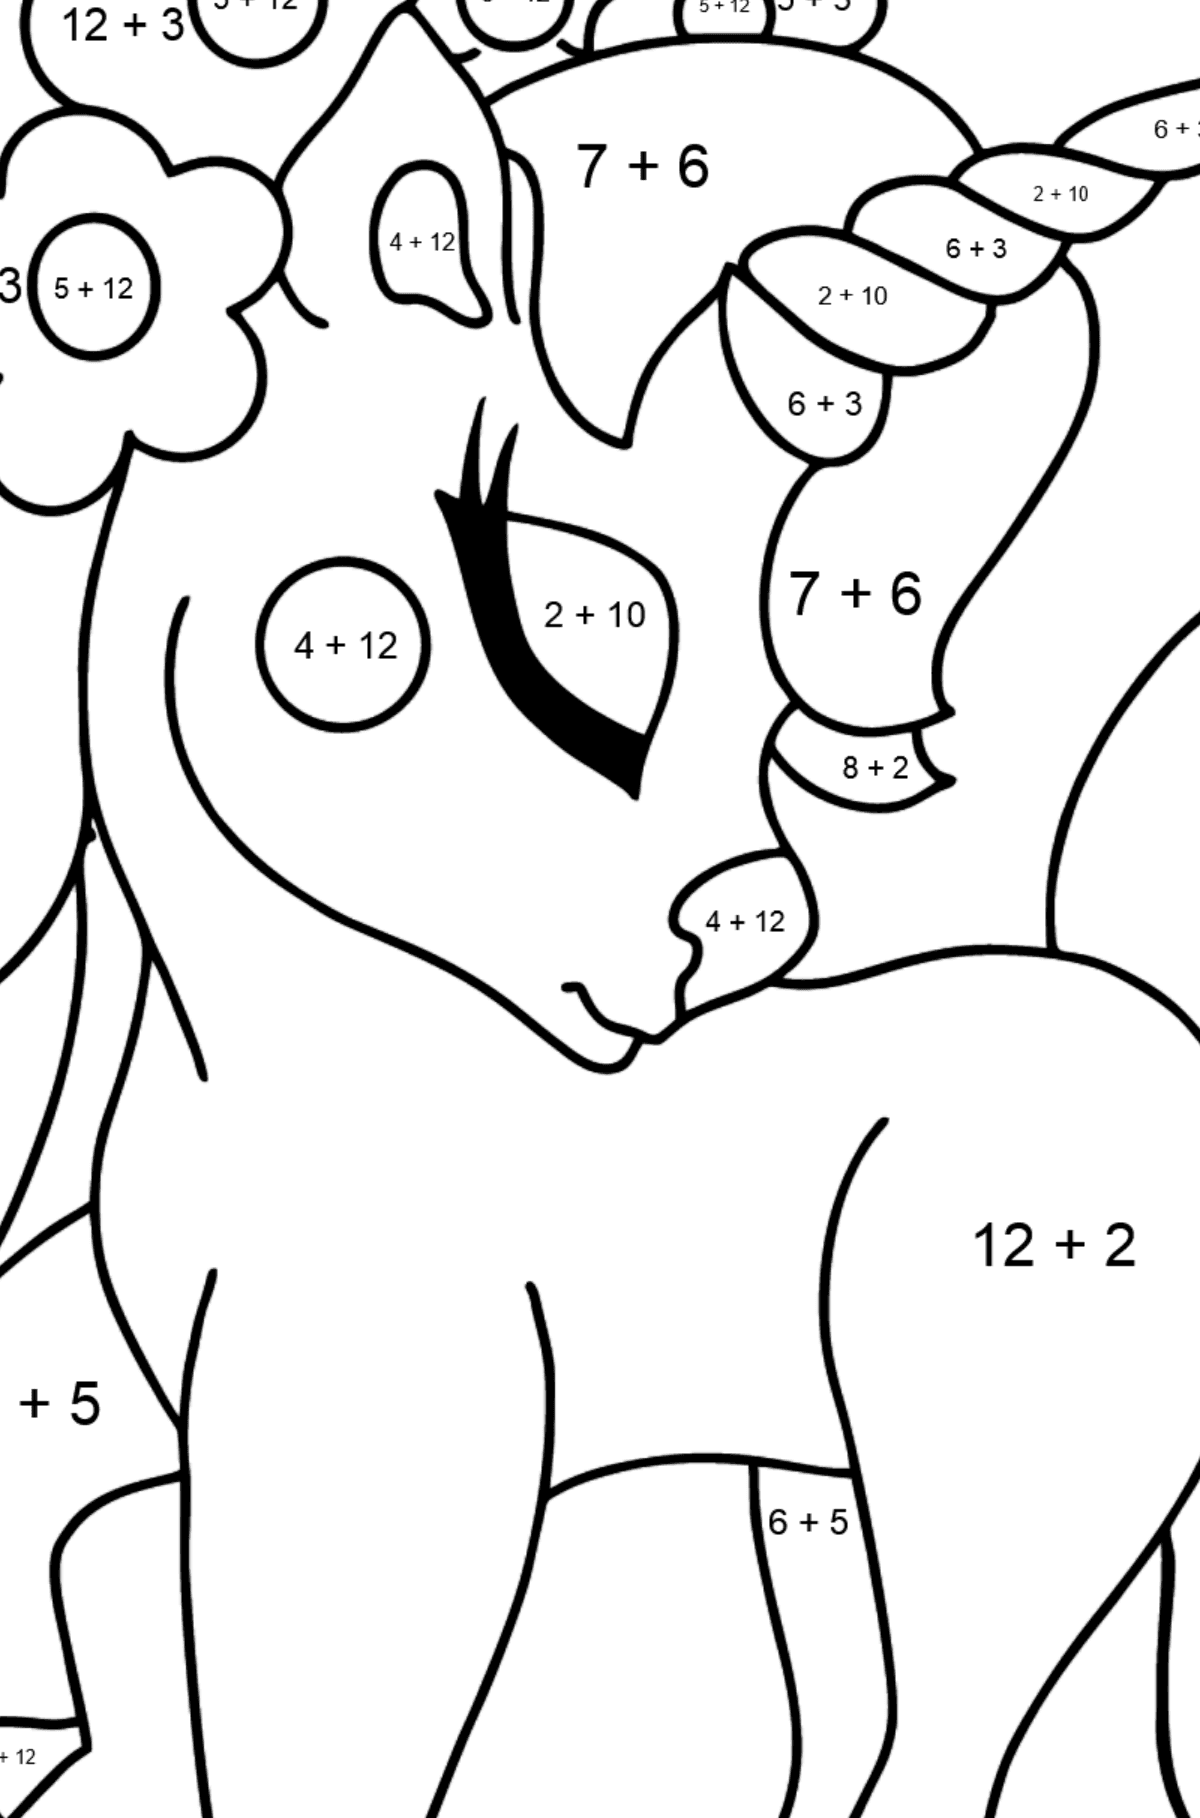 Unicorn in Dreams coloring page - Math Coloring - Addition for Kids